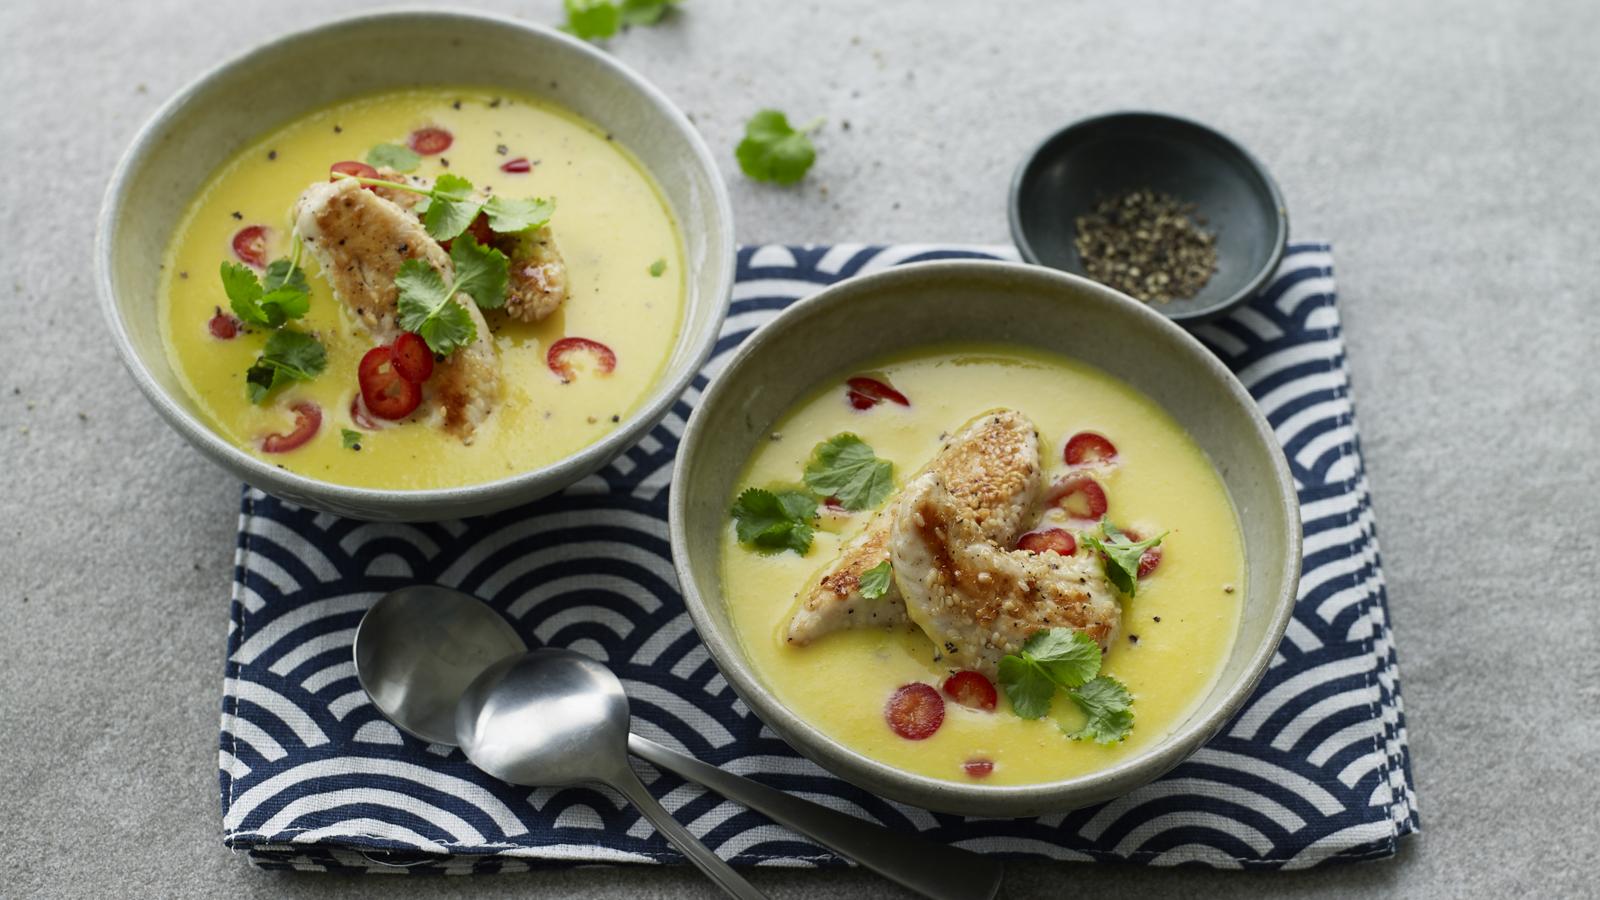 Chicken soup recipes - BBC Food